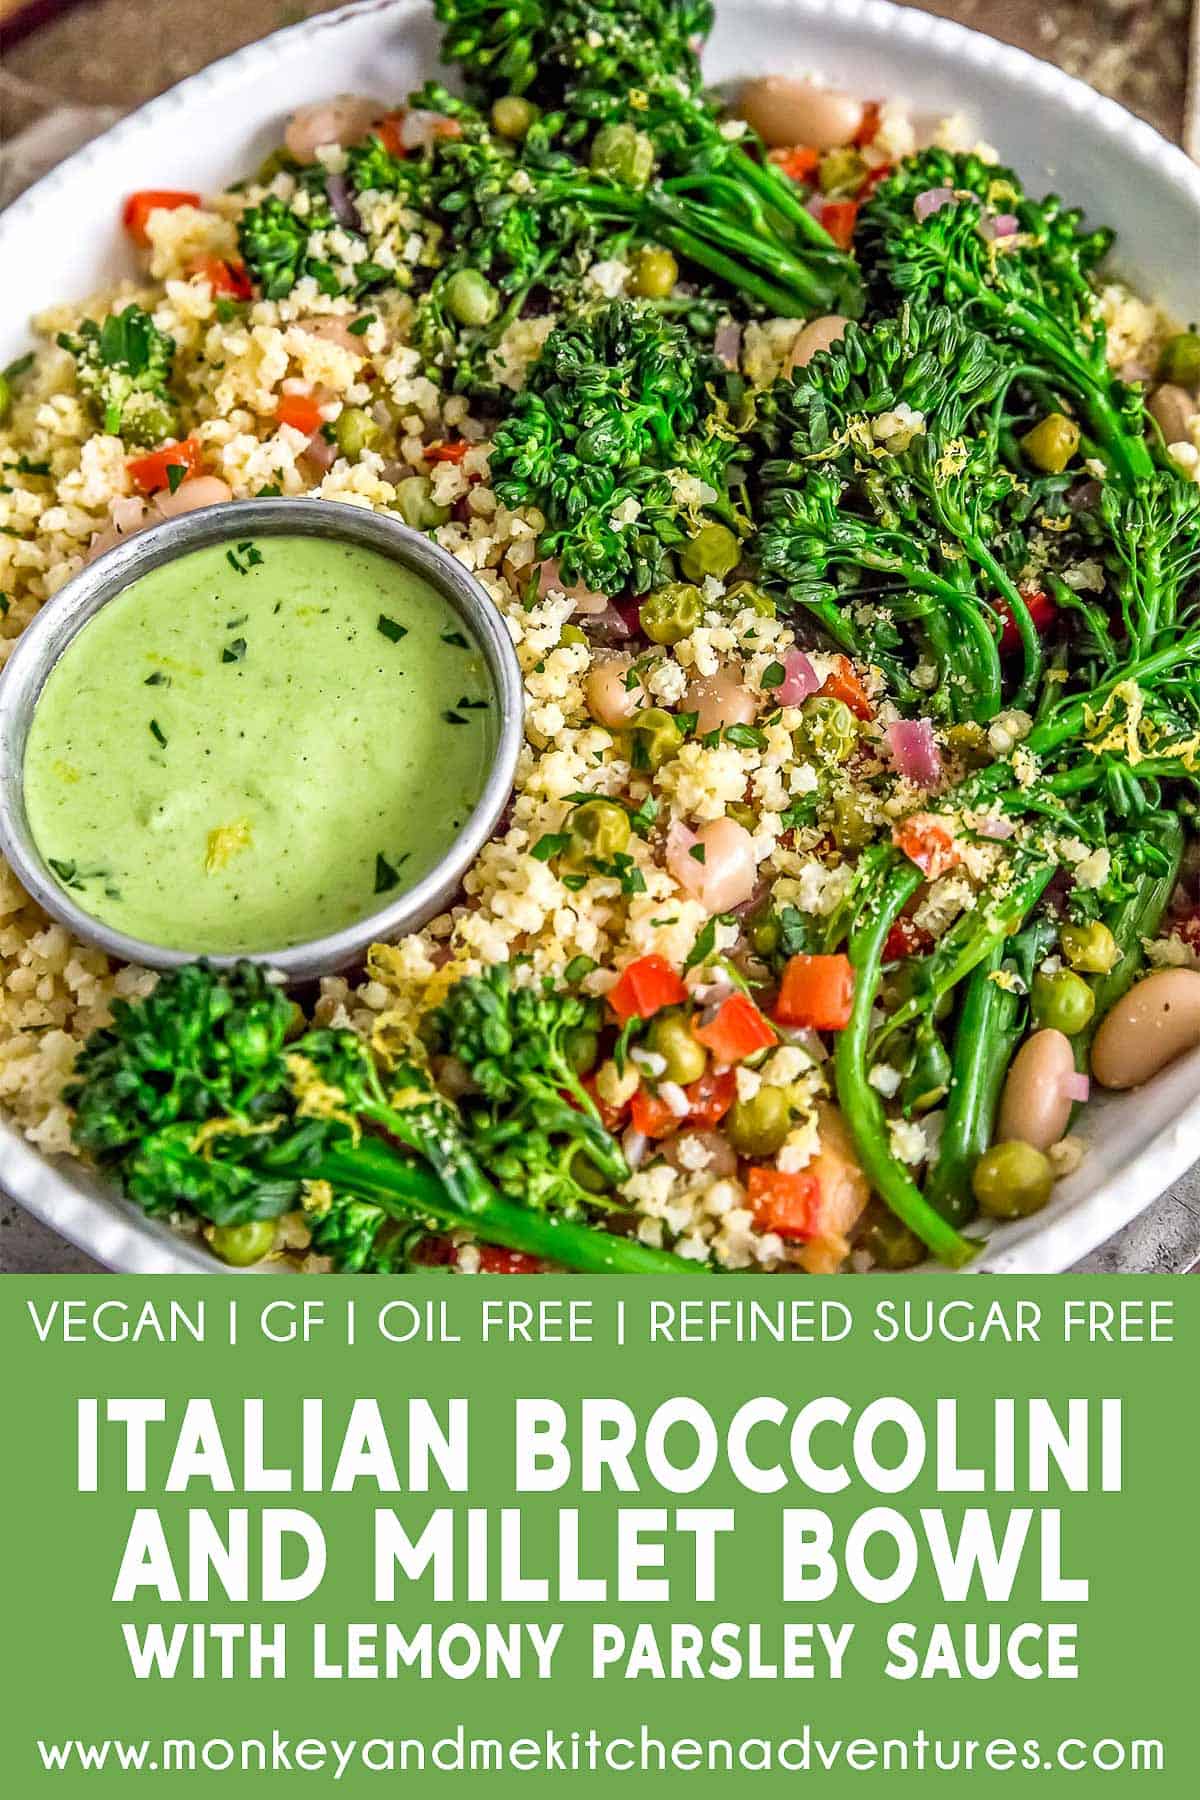 Italian Broccolini Millet Bowl with Lemony Parsley Sauce with Text Description